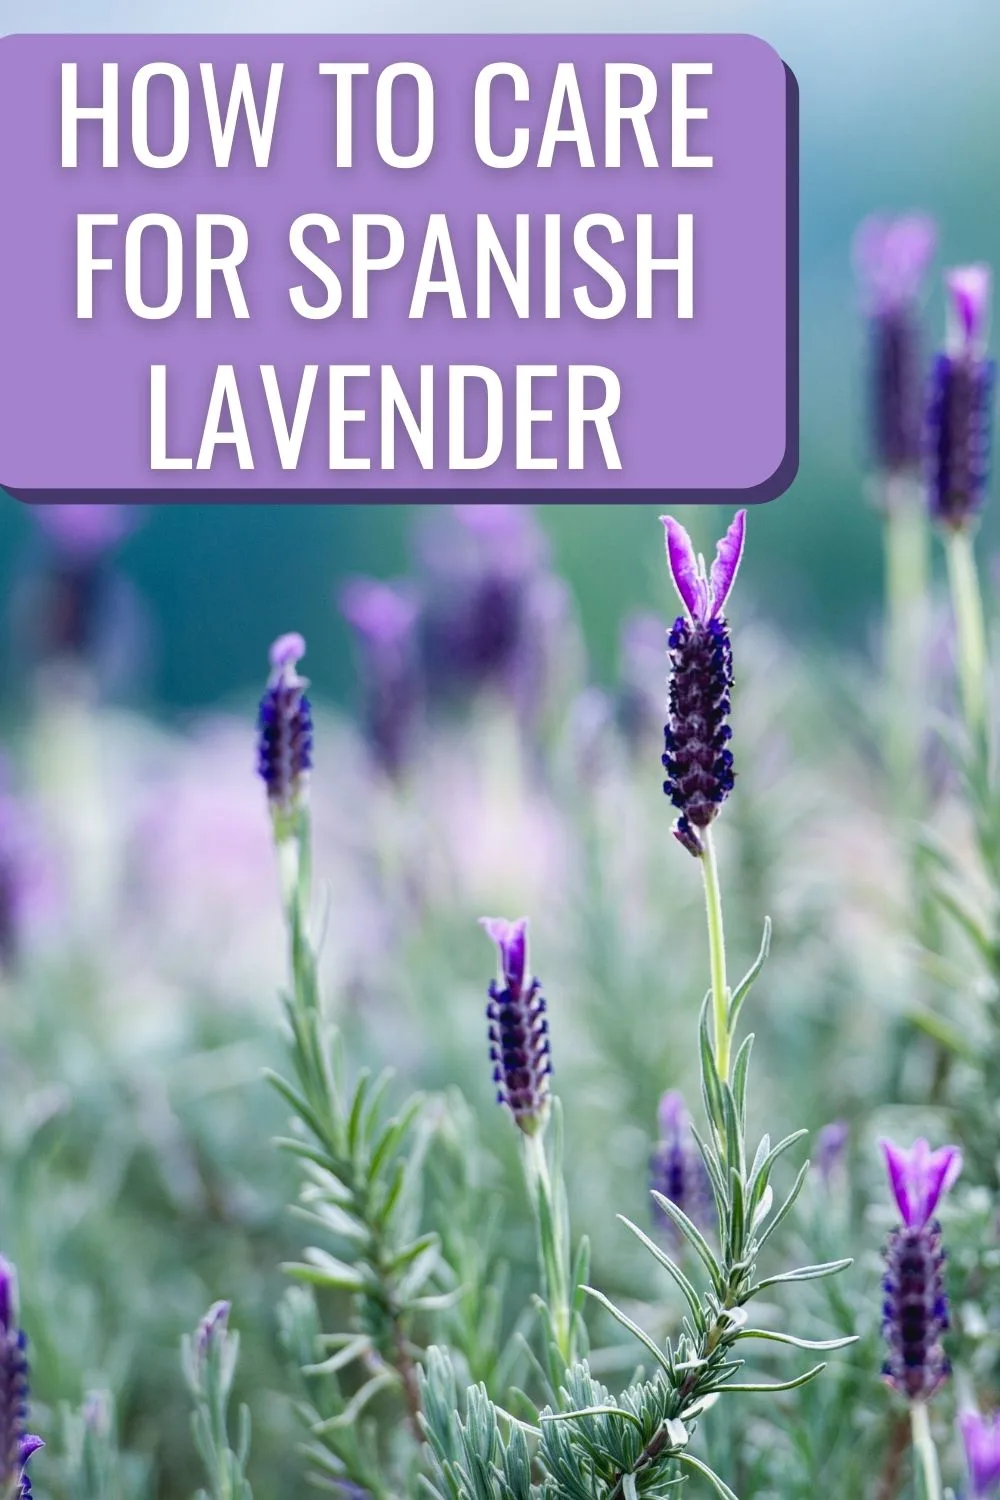 How to care for Spanish lavender.